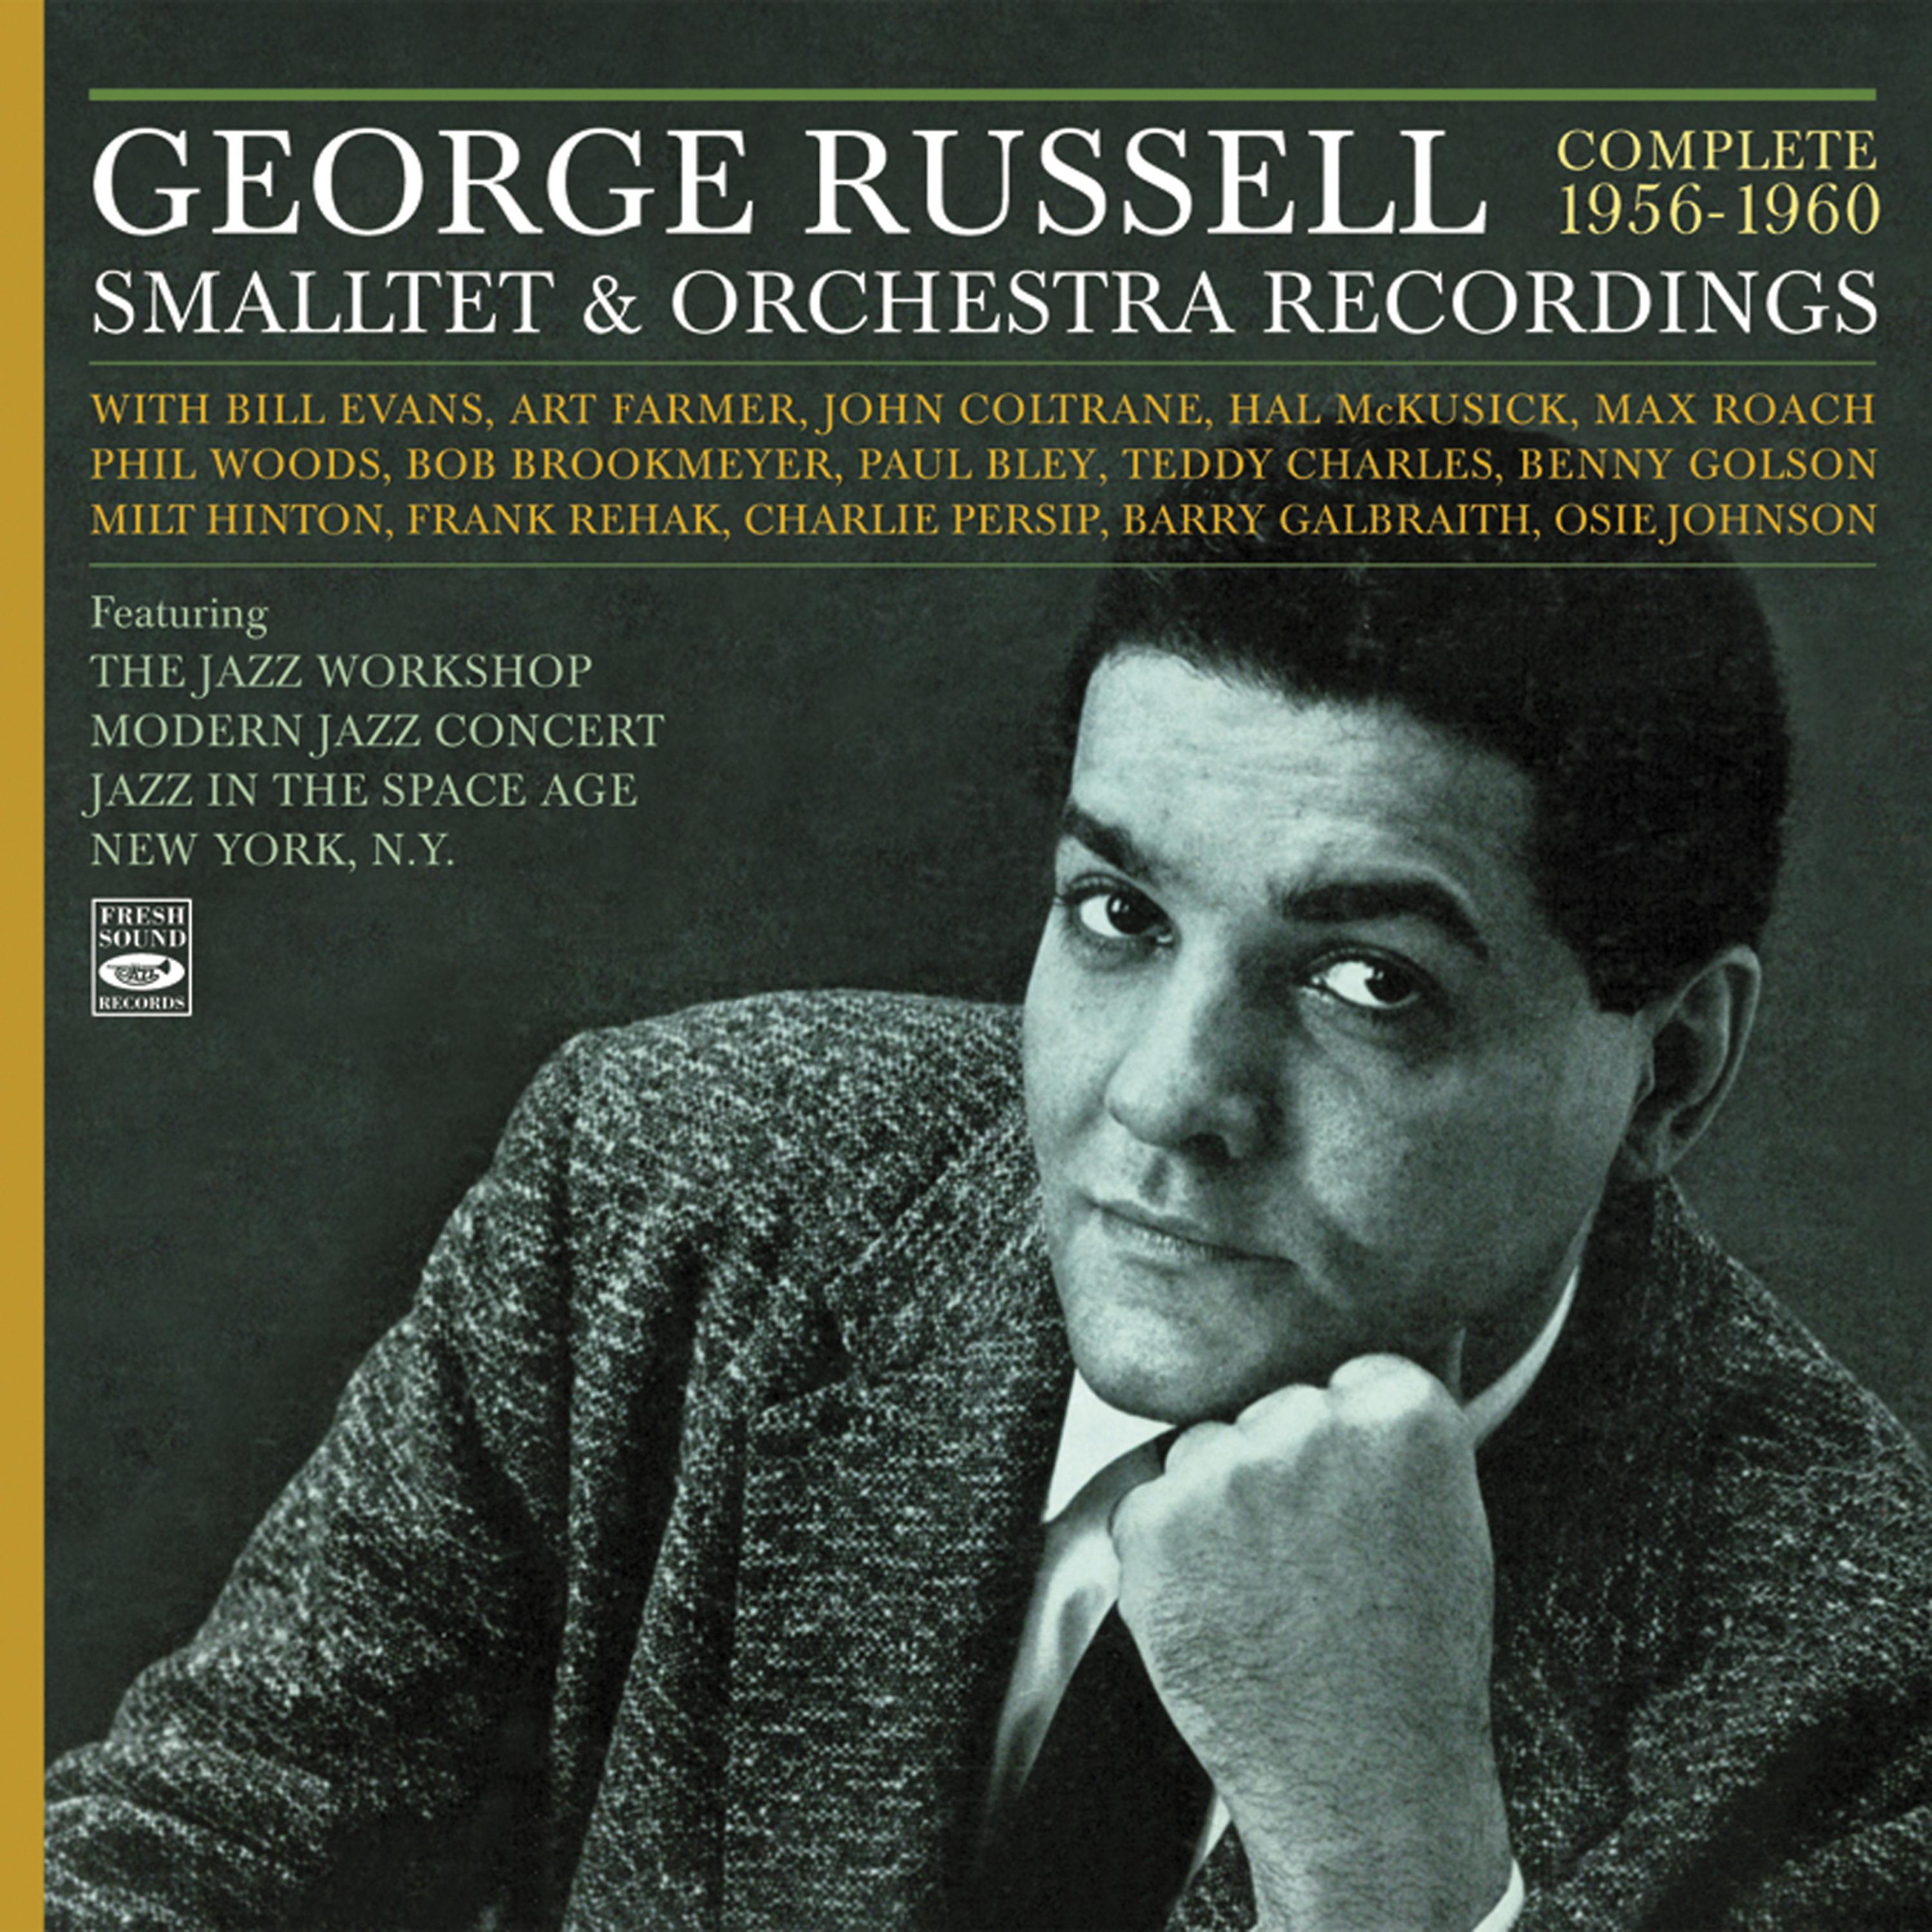 Постер альбома George Russell. Complete 1956-1960 Smalltet & Orchestra Recordings. Featuring the Jazz Workshop / Modern Jazz Concert / Jazz in the Space Age / New York, N.Y.